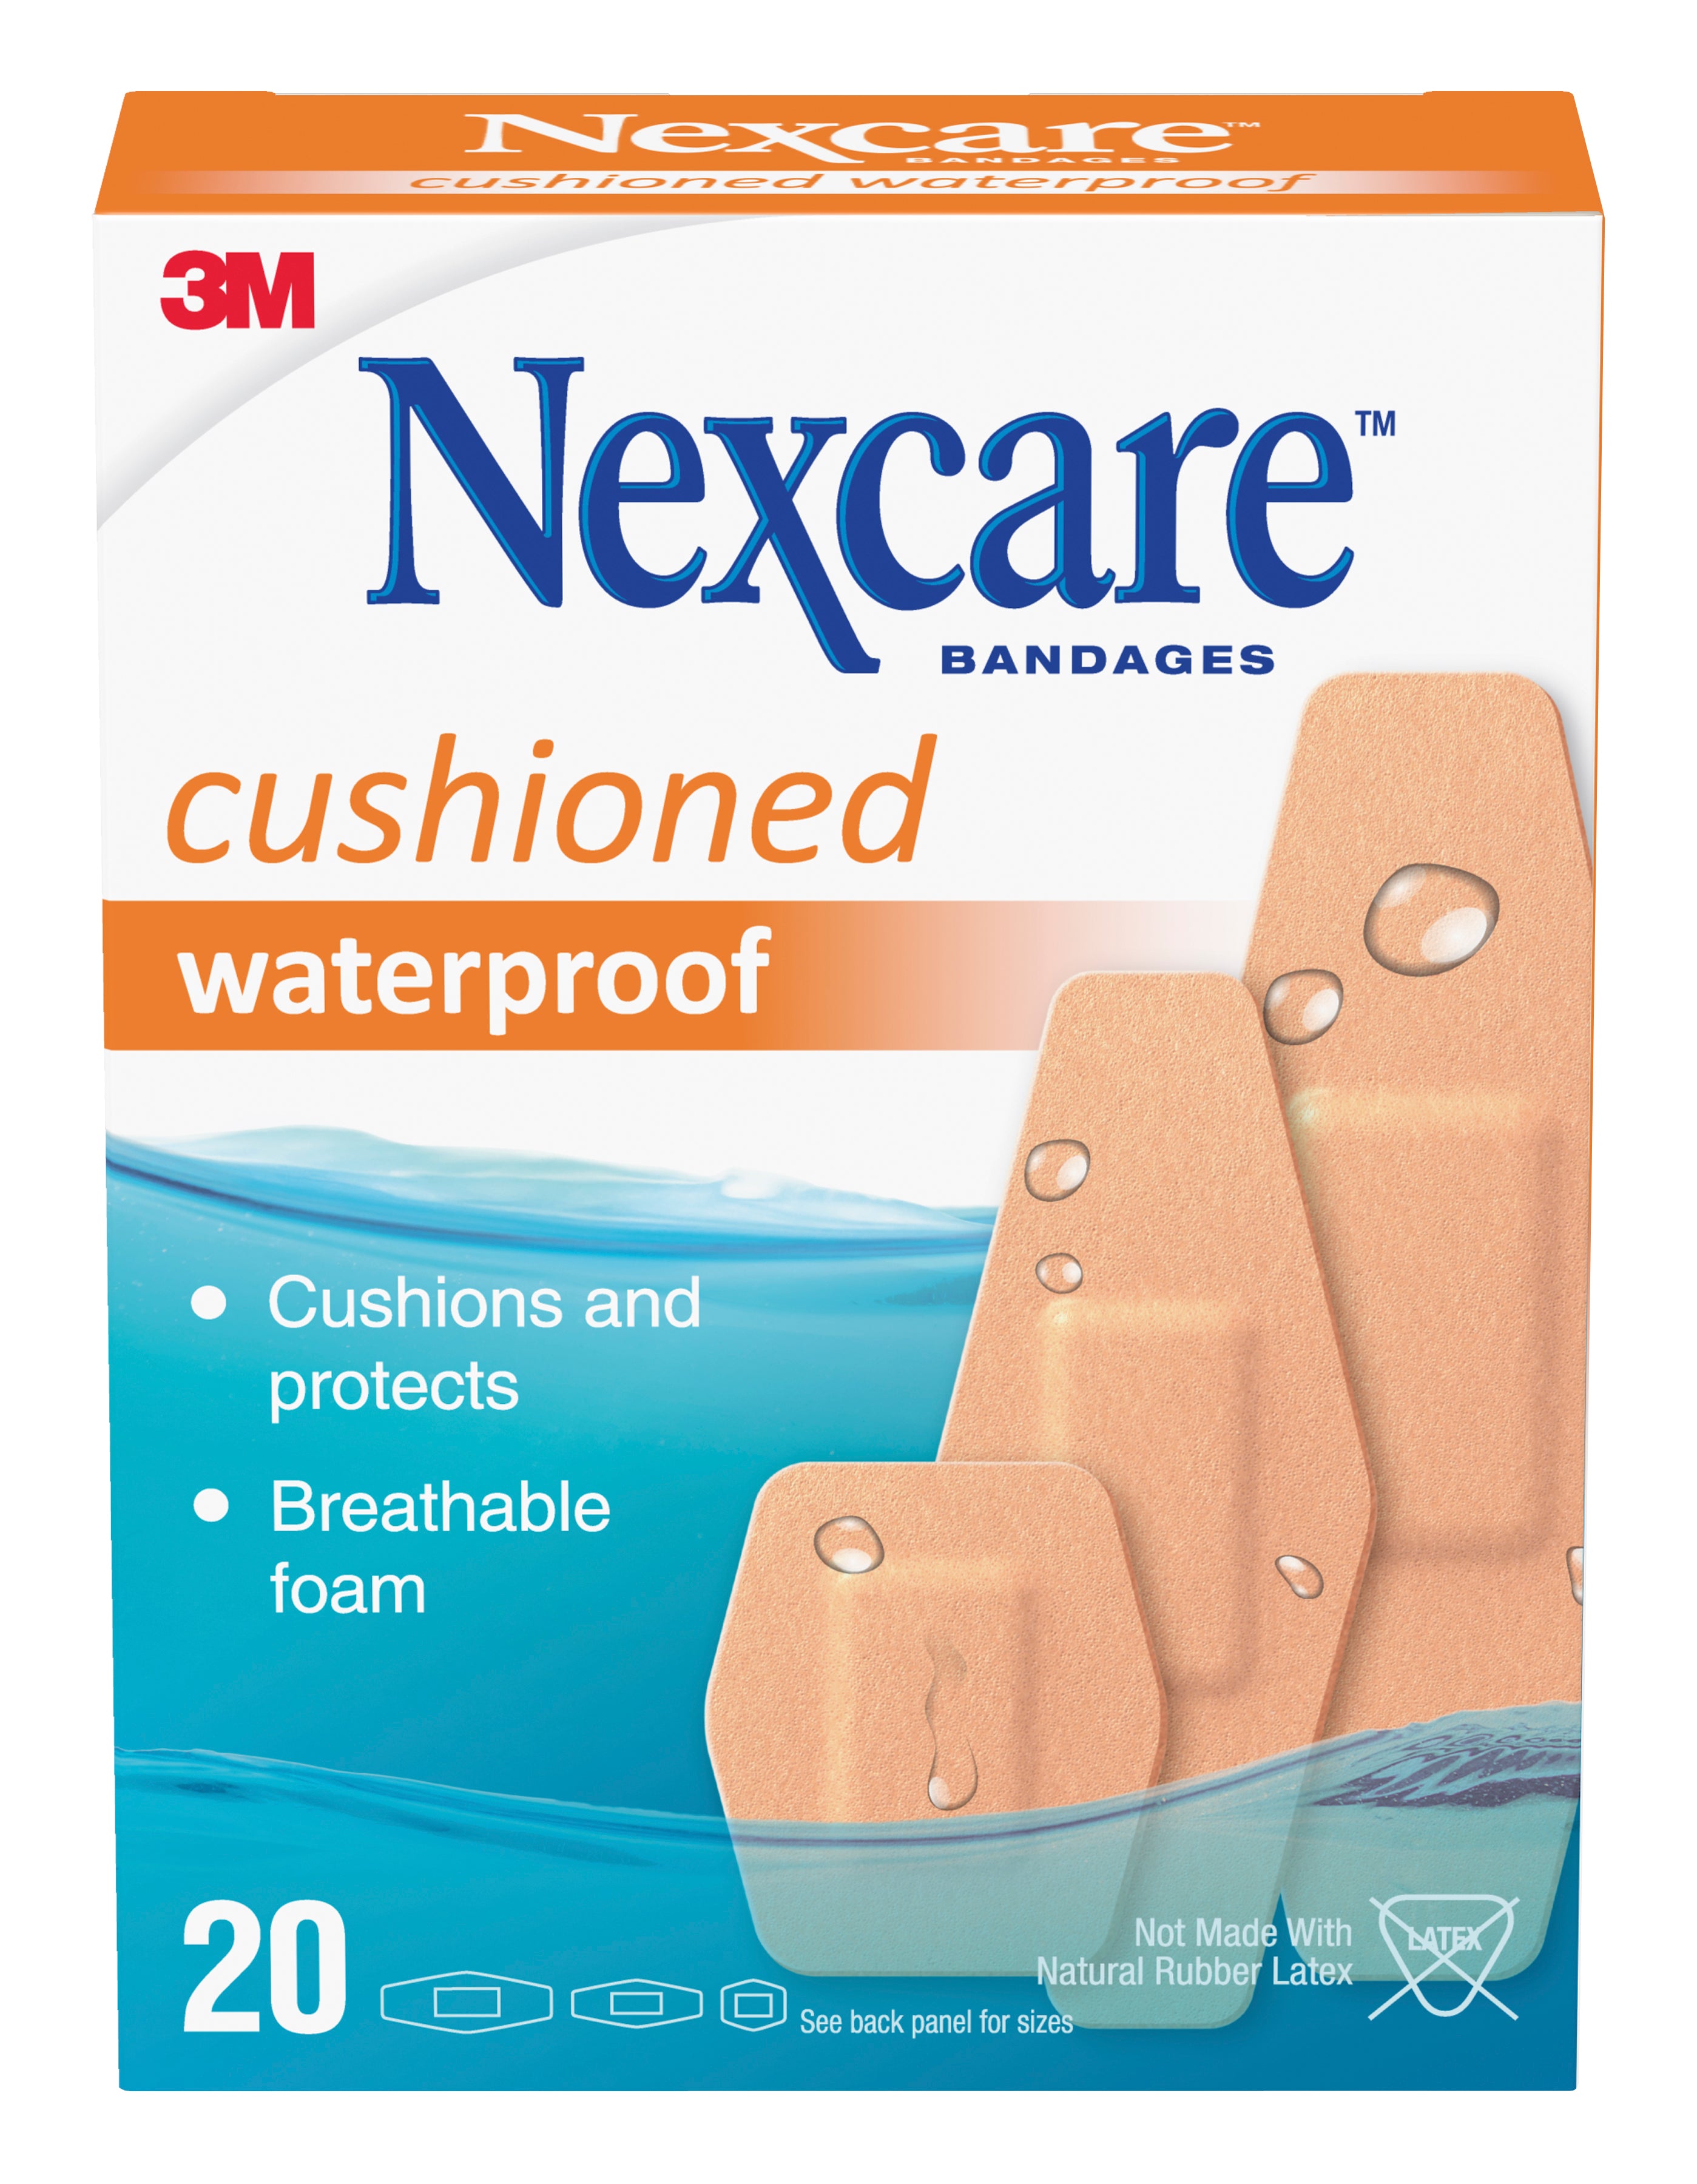 Nexcare Cushioned Waterproof Assorted Bandages 20